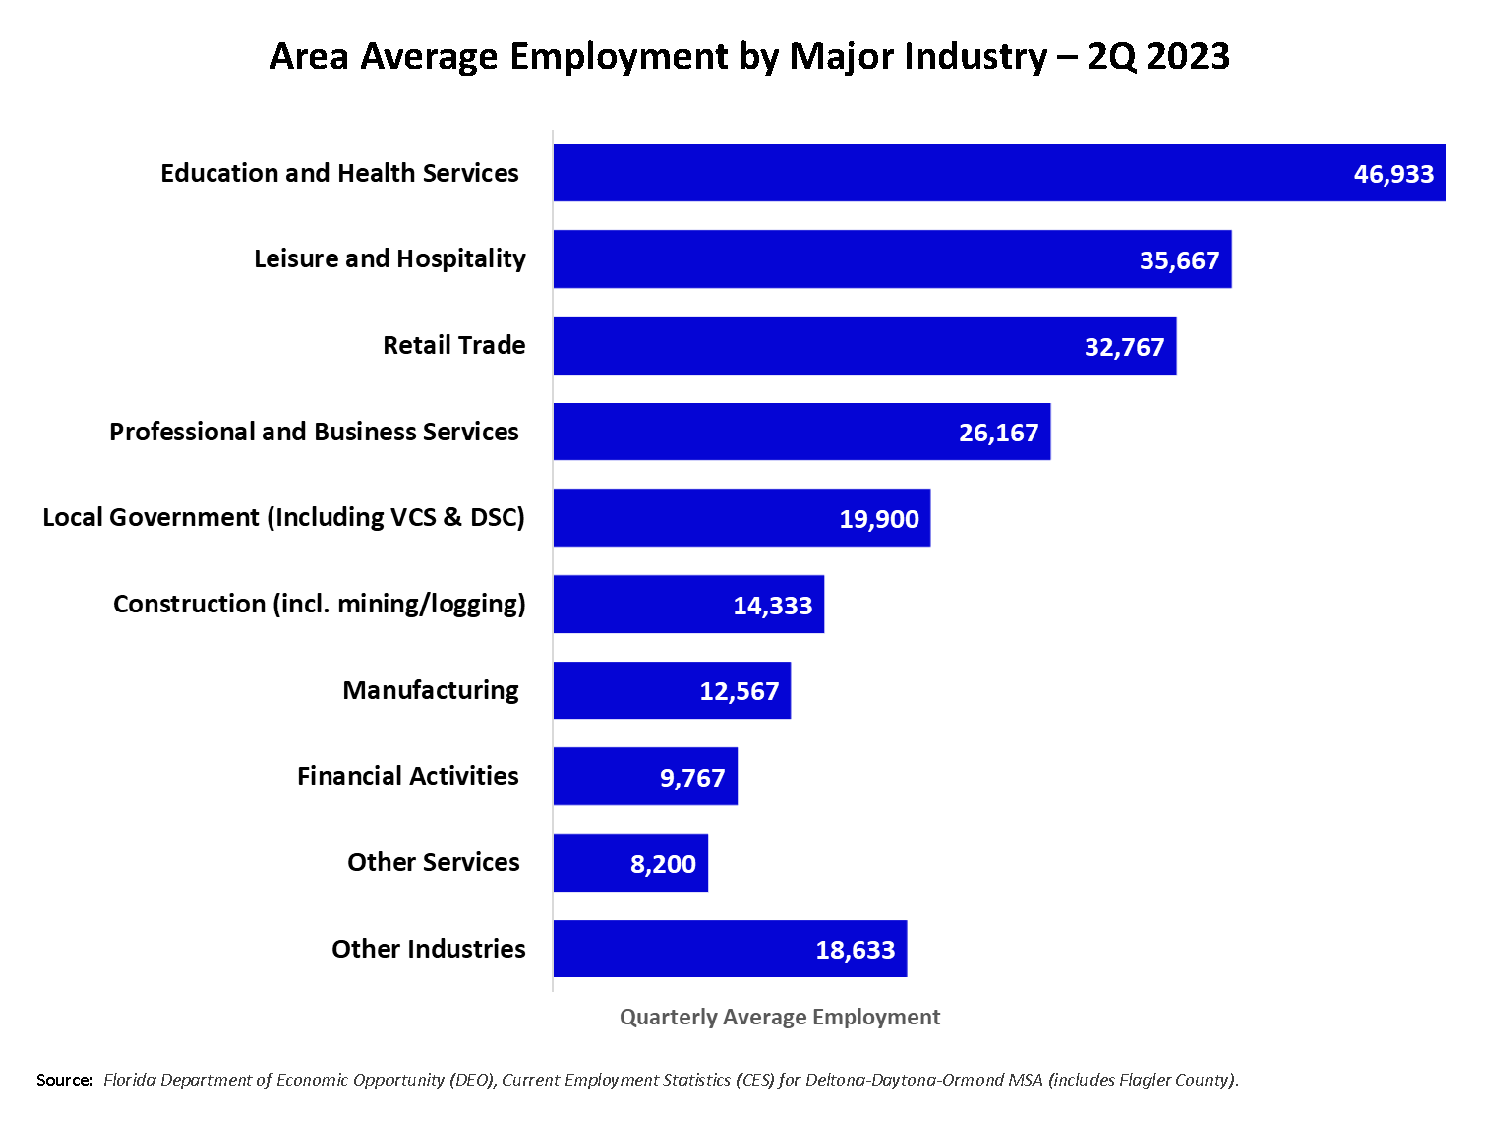 The chart displays industries for the 2nd quarter of 2023 and the employment amounts associated with each for the Deltona-Daytona-Ormond MSA that includes Flagler County. Education and health services 46,933 Leisure and hospitality 35,667. Retail trade 32,767. Professional and business services 26,167. Local government including Volusia County Schools and Daytona State College 19,900. Construction including mining & logging 14,333. Manufacturing 12,567. Financial activities 9,767. Other services 8,200. Other industries 18,633.  